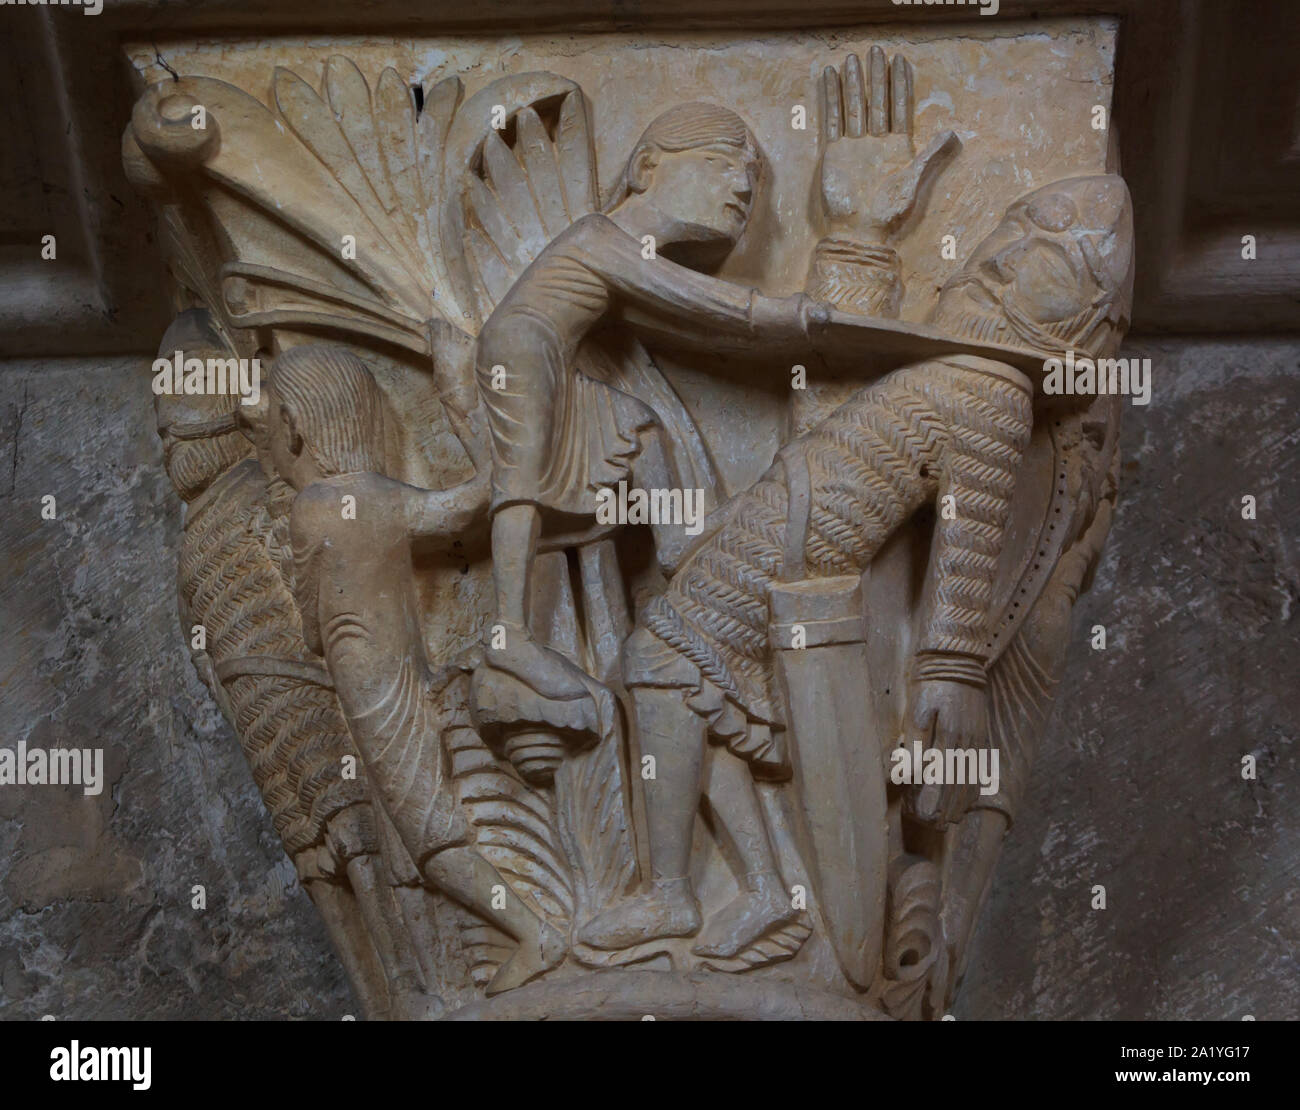 David slaying Goliath depicted in the Romanesque capital dated from the 12th century in the Basilica of Saint Mary Magdalene (Basilique Sainte-Marie-Madeleine de Vézelay) of the Vézelay Abbey (Abbaye Sainte-Marie-Madeleine de Vézelay) in Vézelay, Burgundy, France. Stock Photo